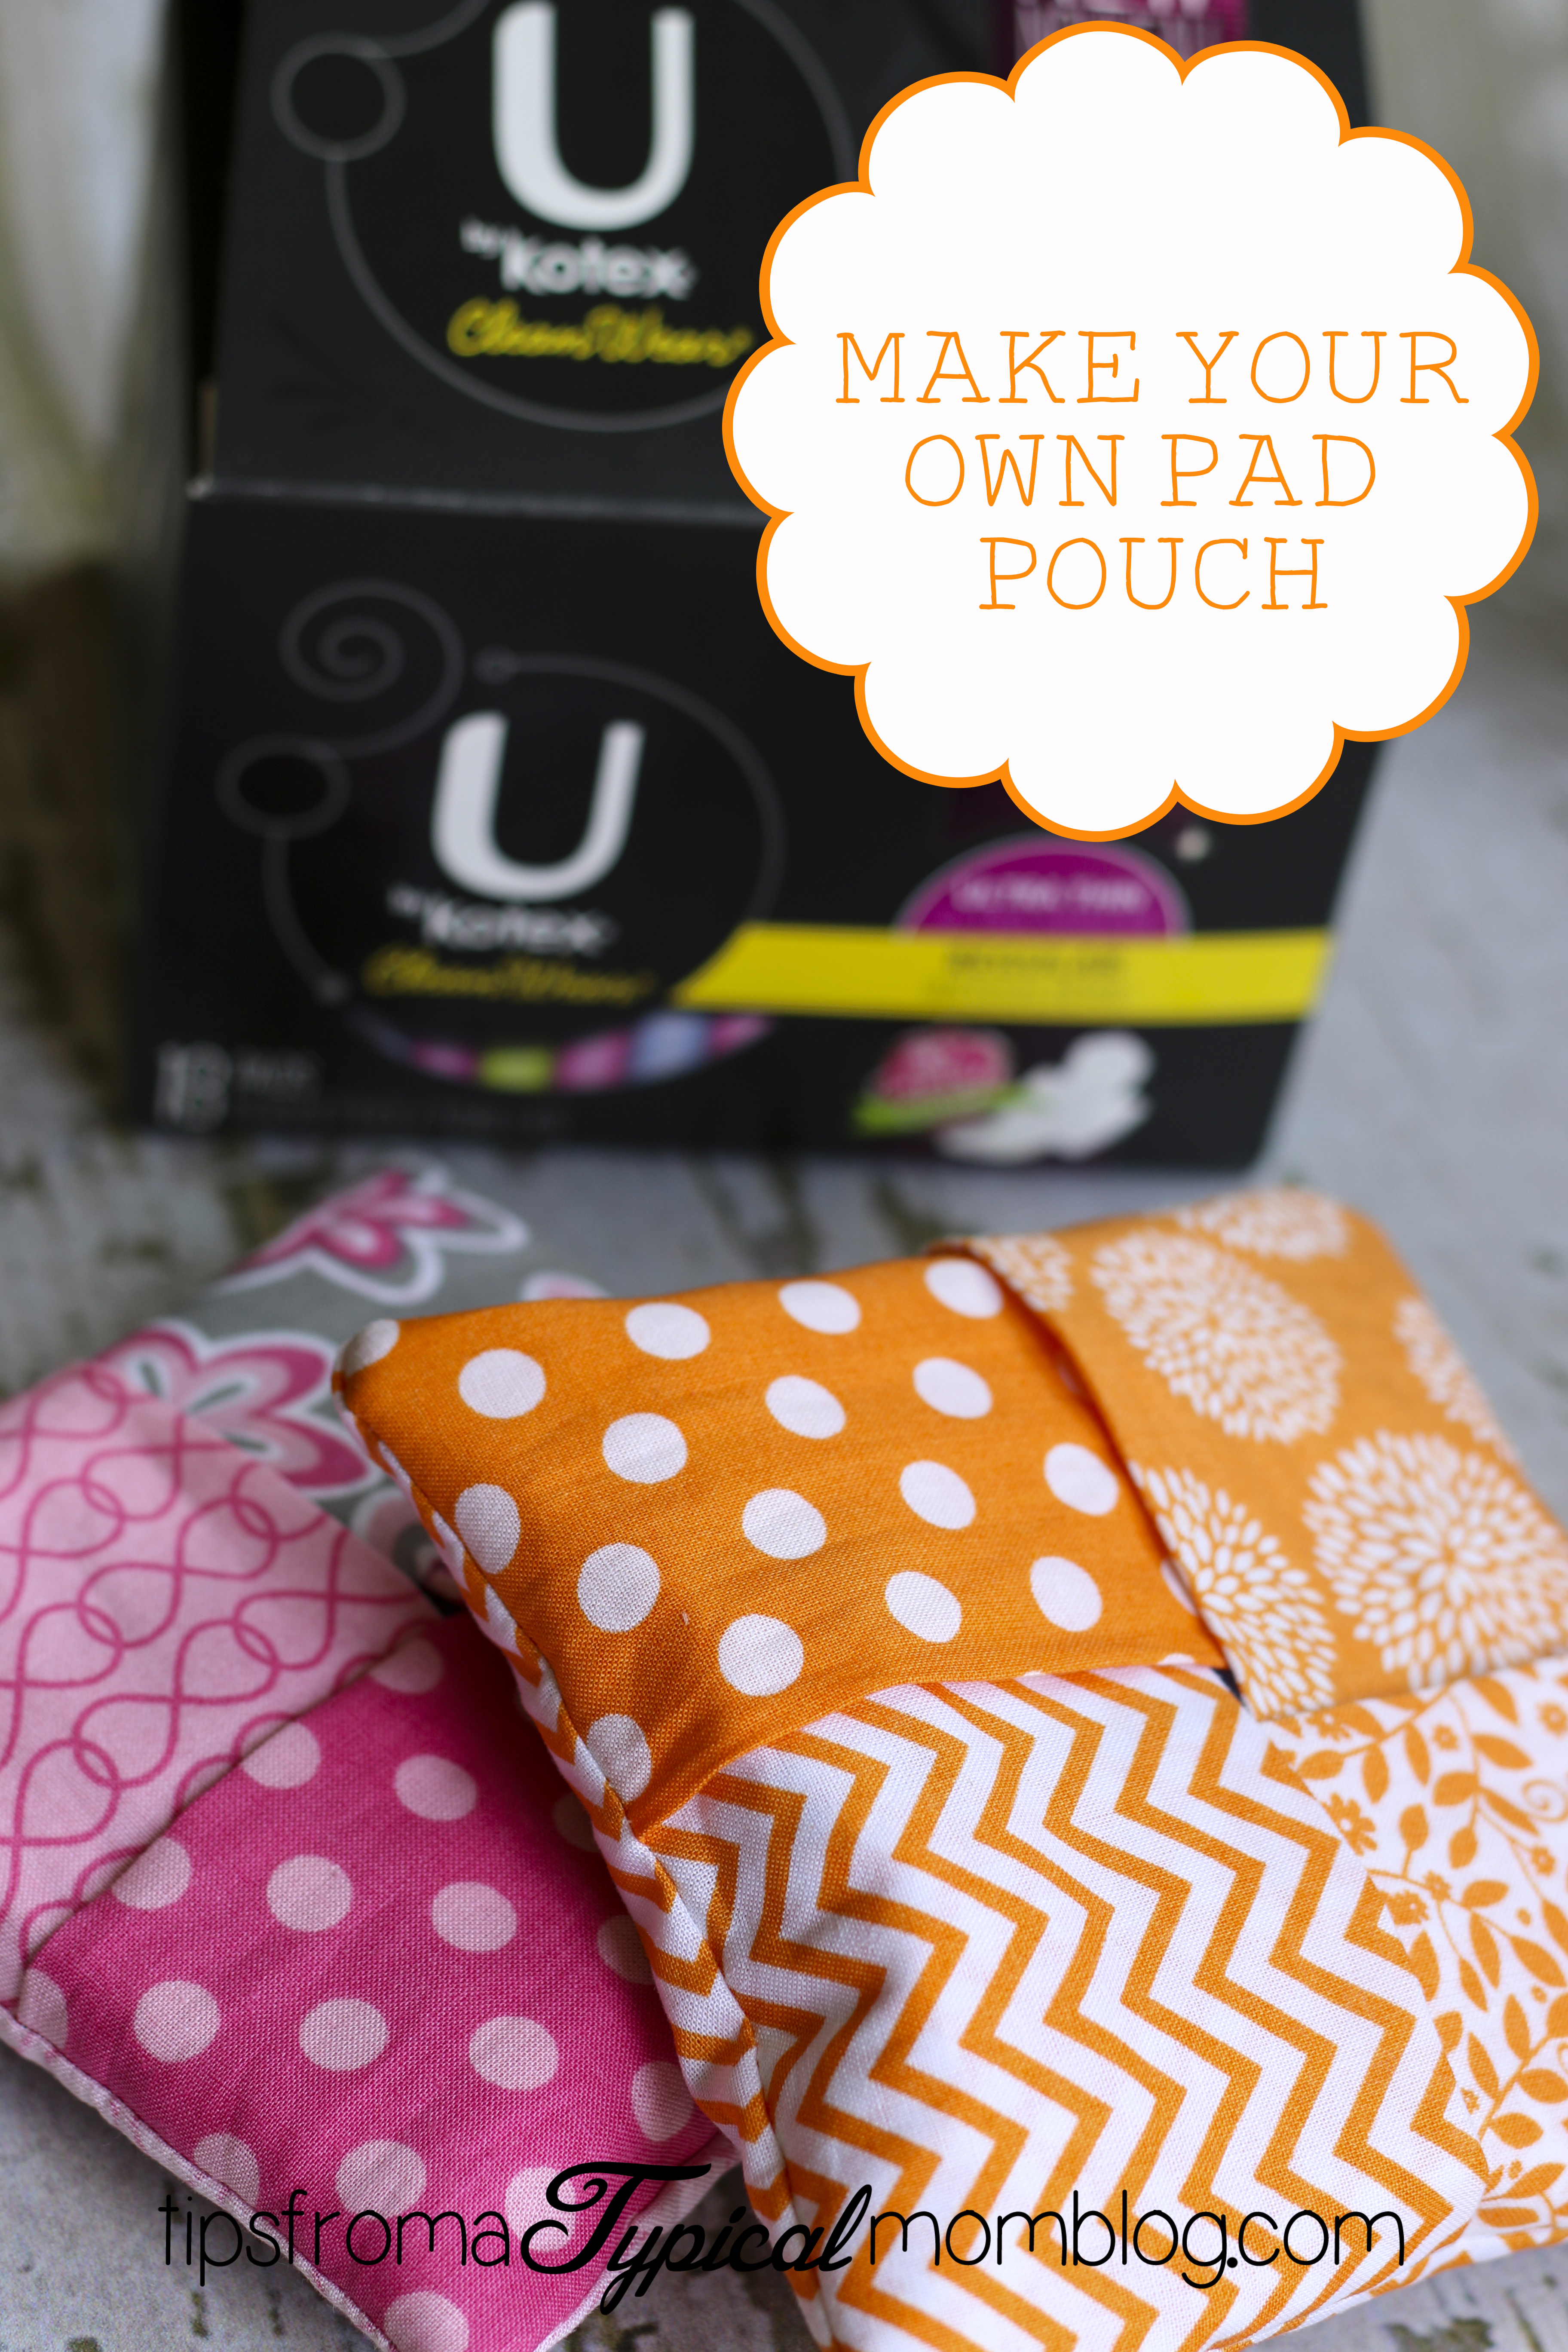 https://www.tipsfromatypicalmomblog.com/wp-content/uploads/2014/05/Make-your-own-Pad-Pouch.jpg